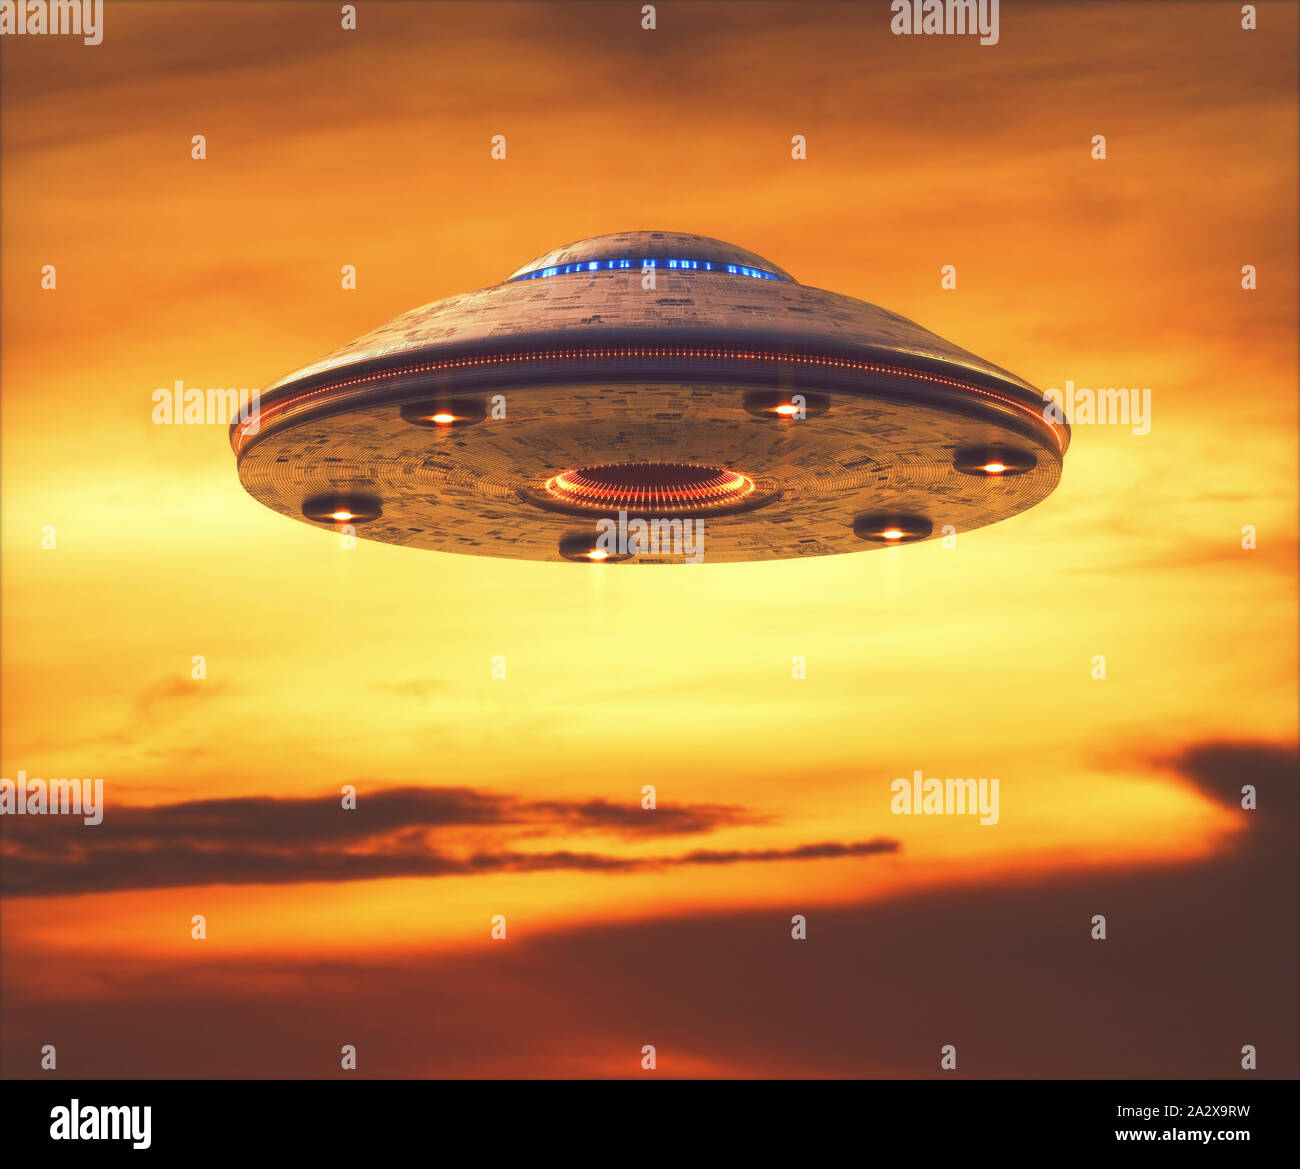 Unidentified flying object. UFO with clipping path included. 3D illustration with Clipping Mask. Stock Photo